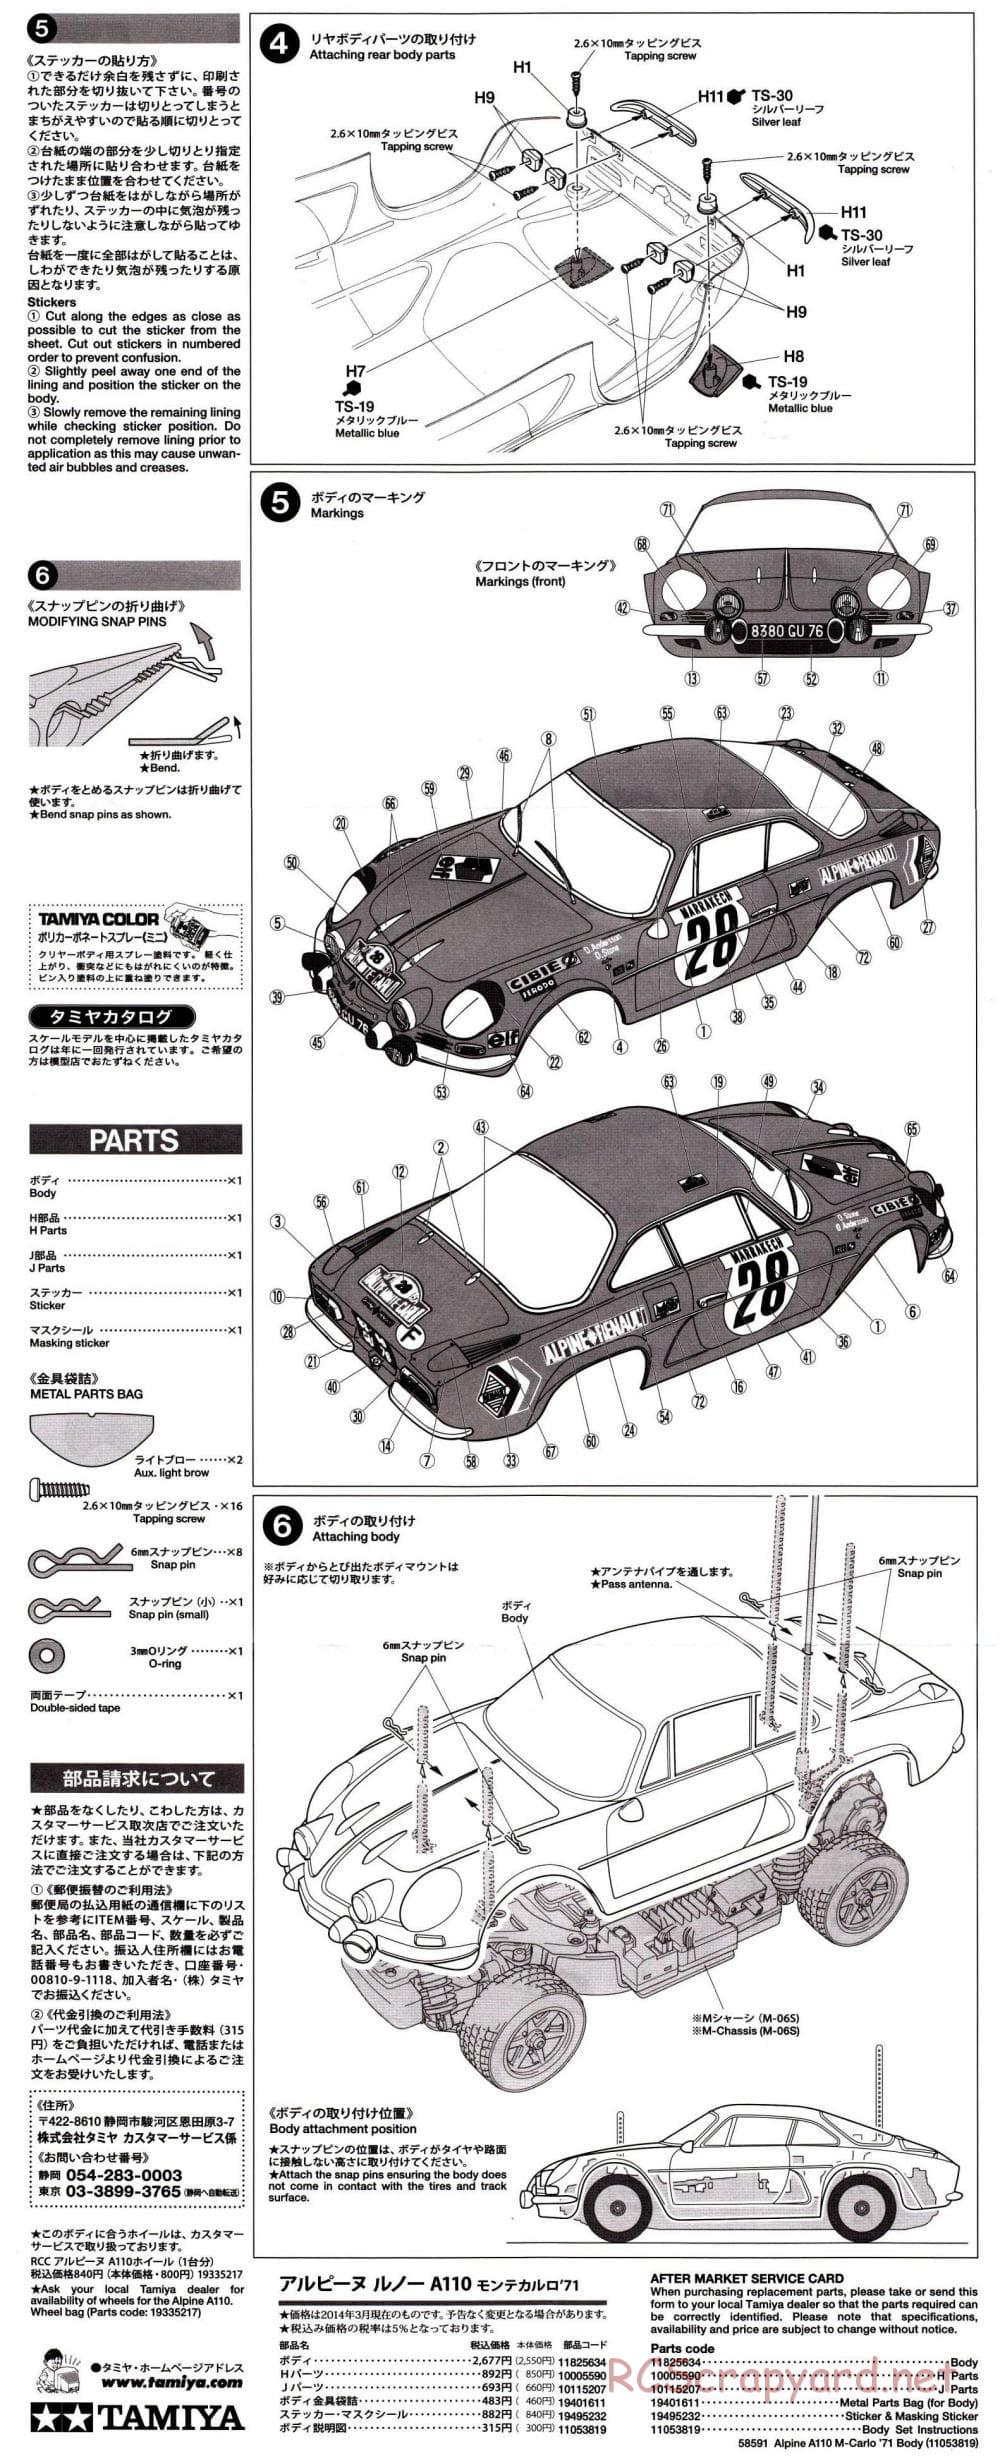 Tamiya - Renault Alpine A110 Monte-Carlo '71 - M-06 Chassis - Body Manual - Page 2